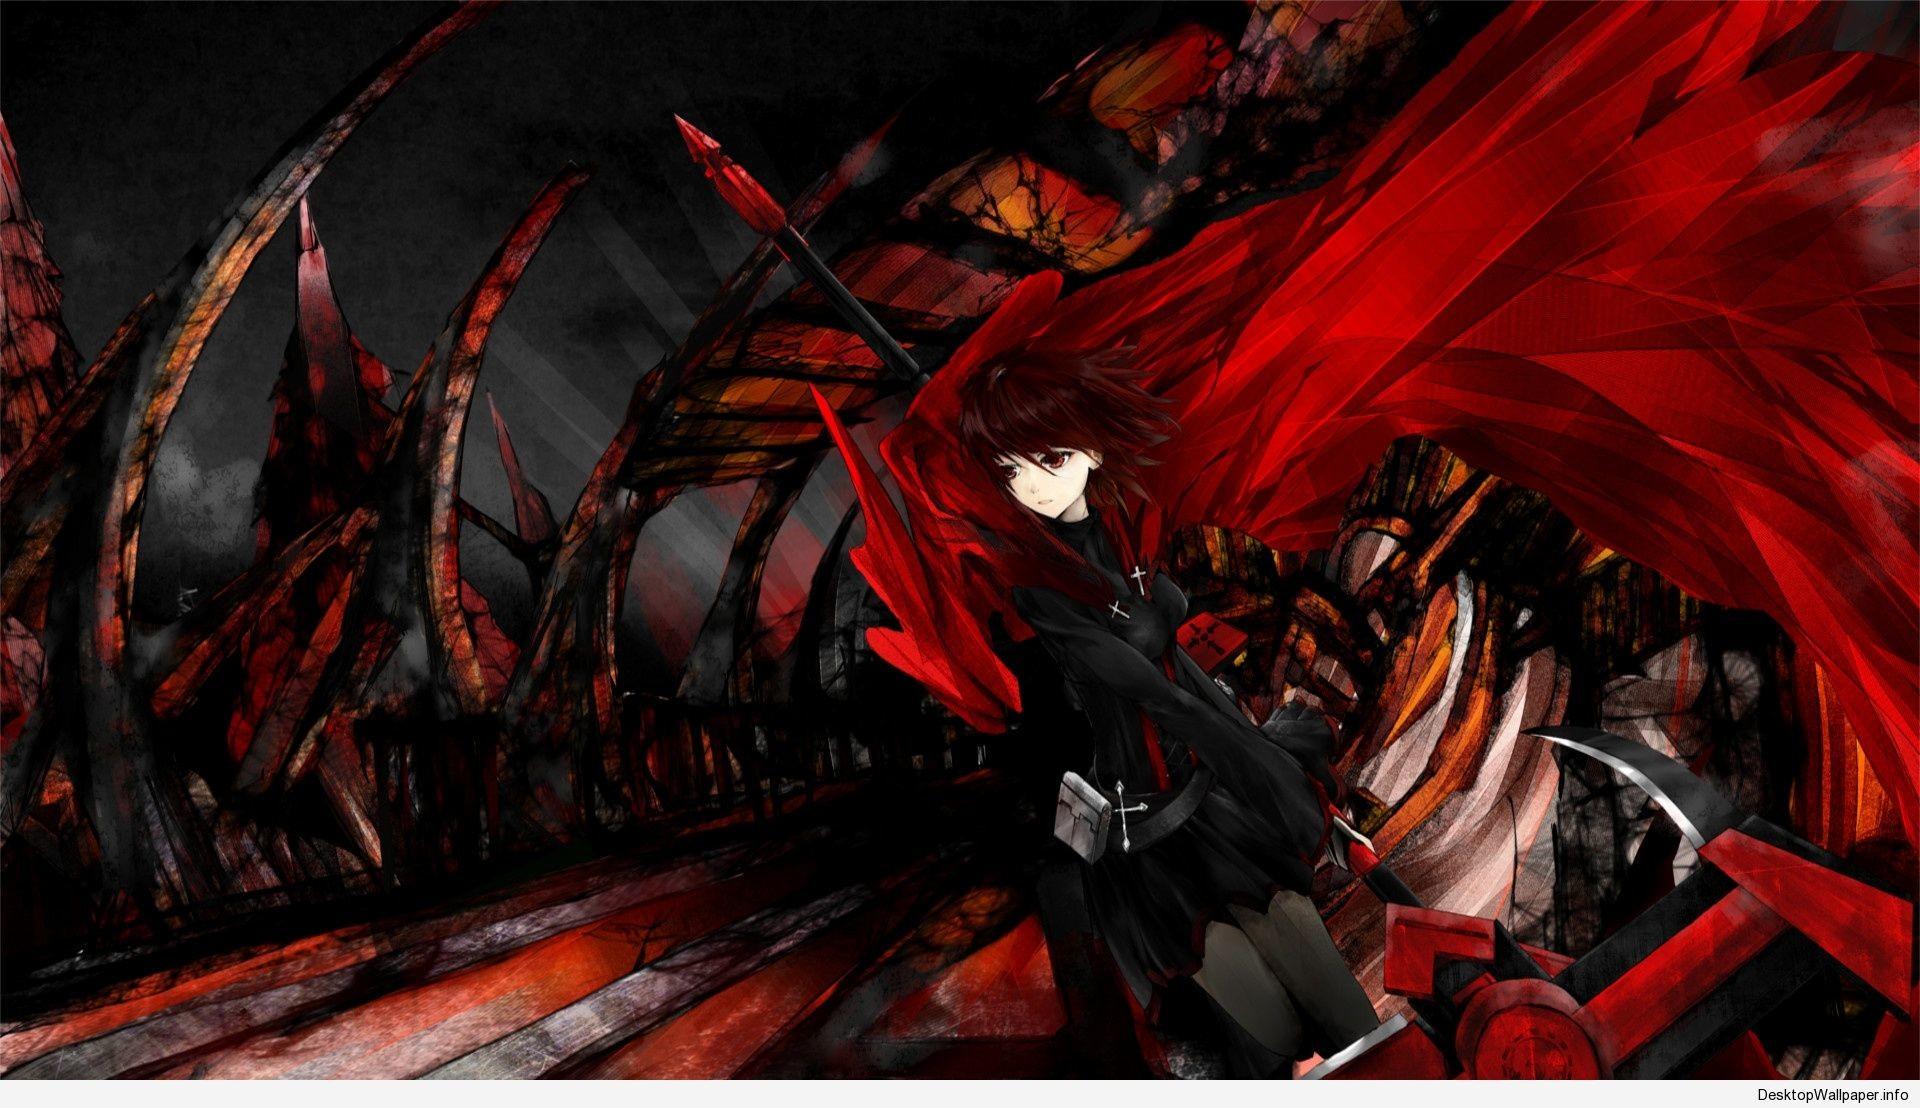 Red Anime Wallpapers - Top Free Red Anime Backgrounds - WallpaperAccess